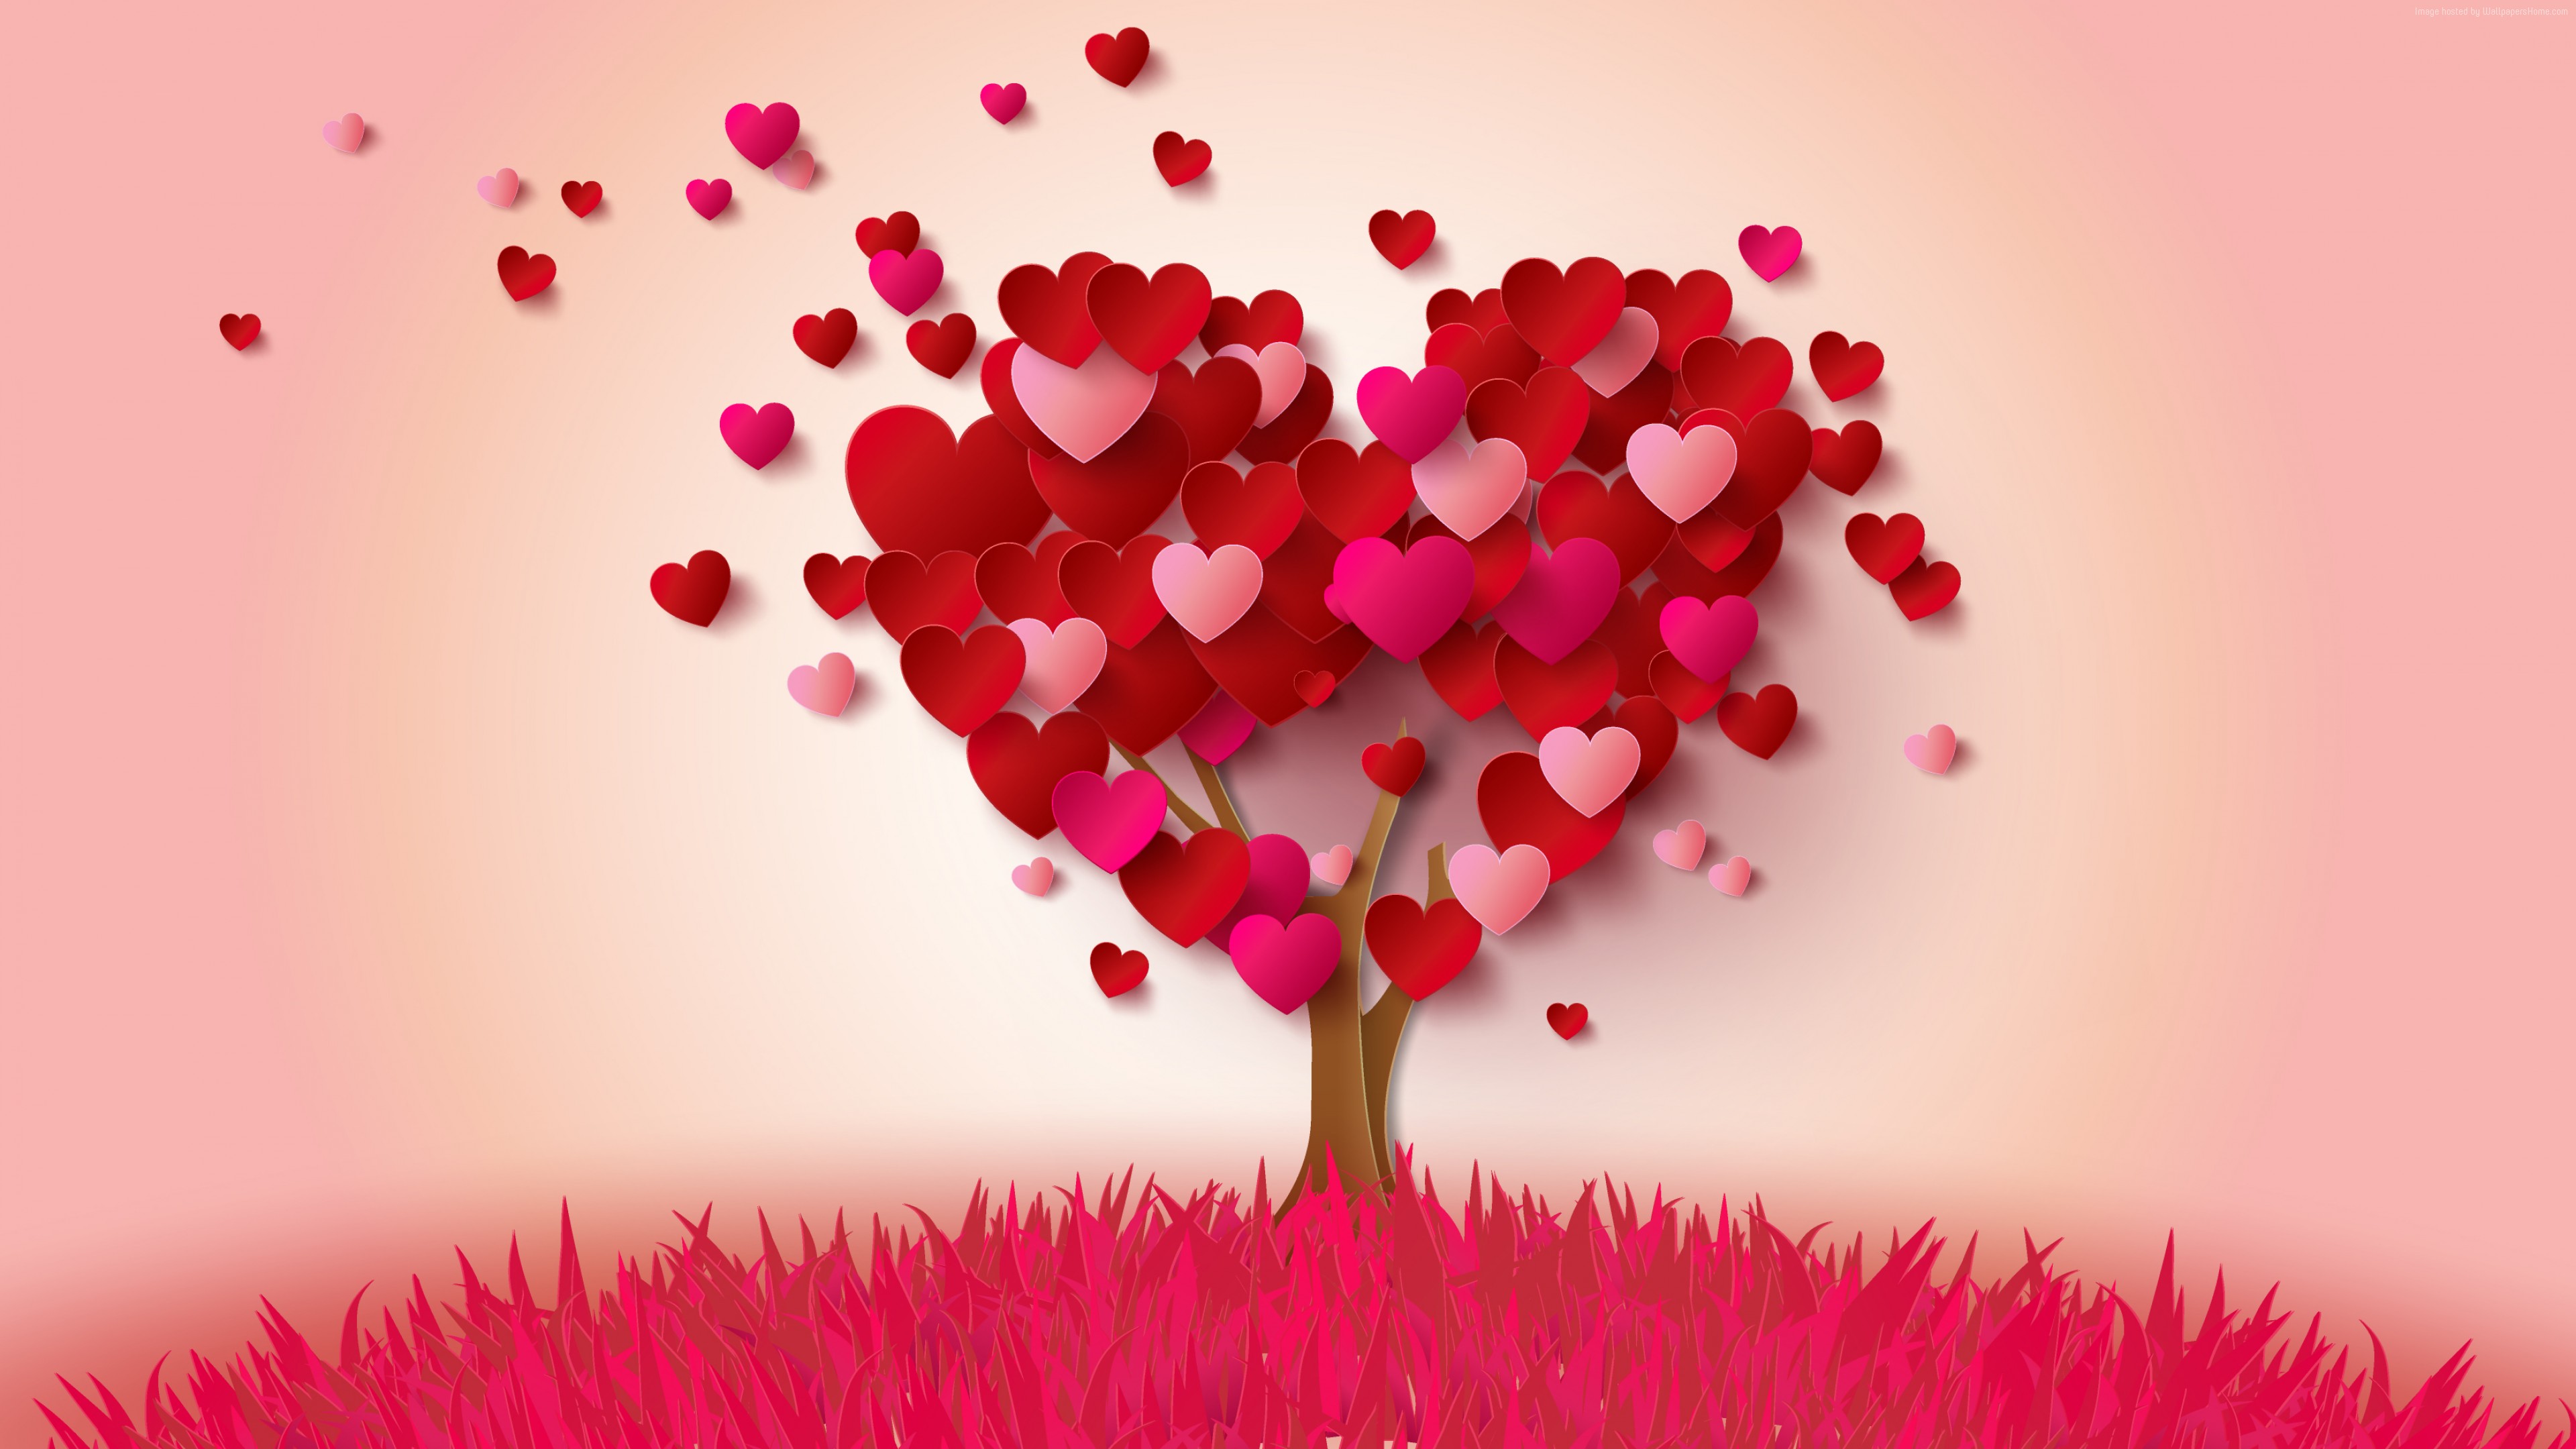 Stock Images love image, heart, tree, 4k, Stock Images